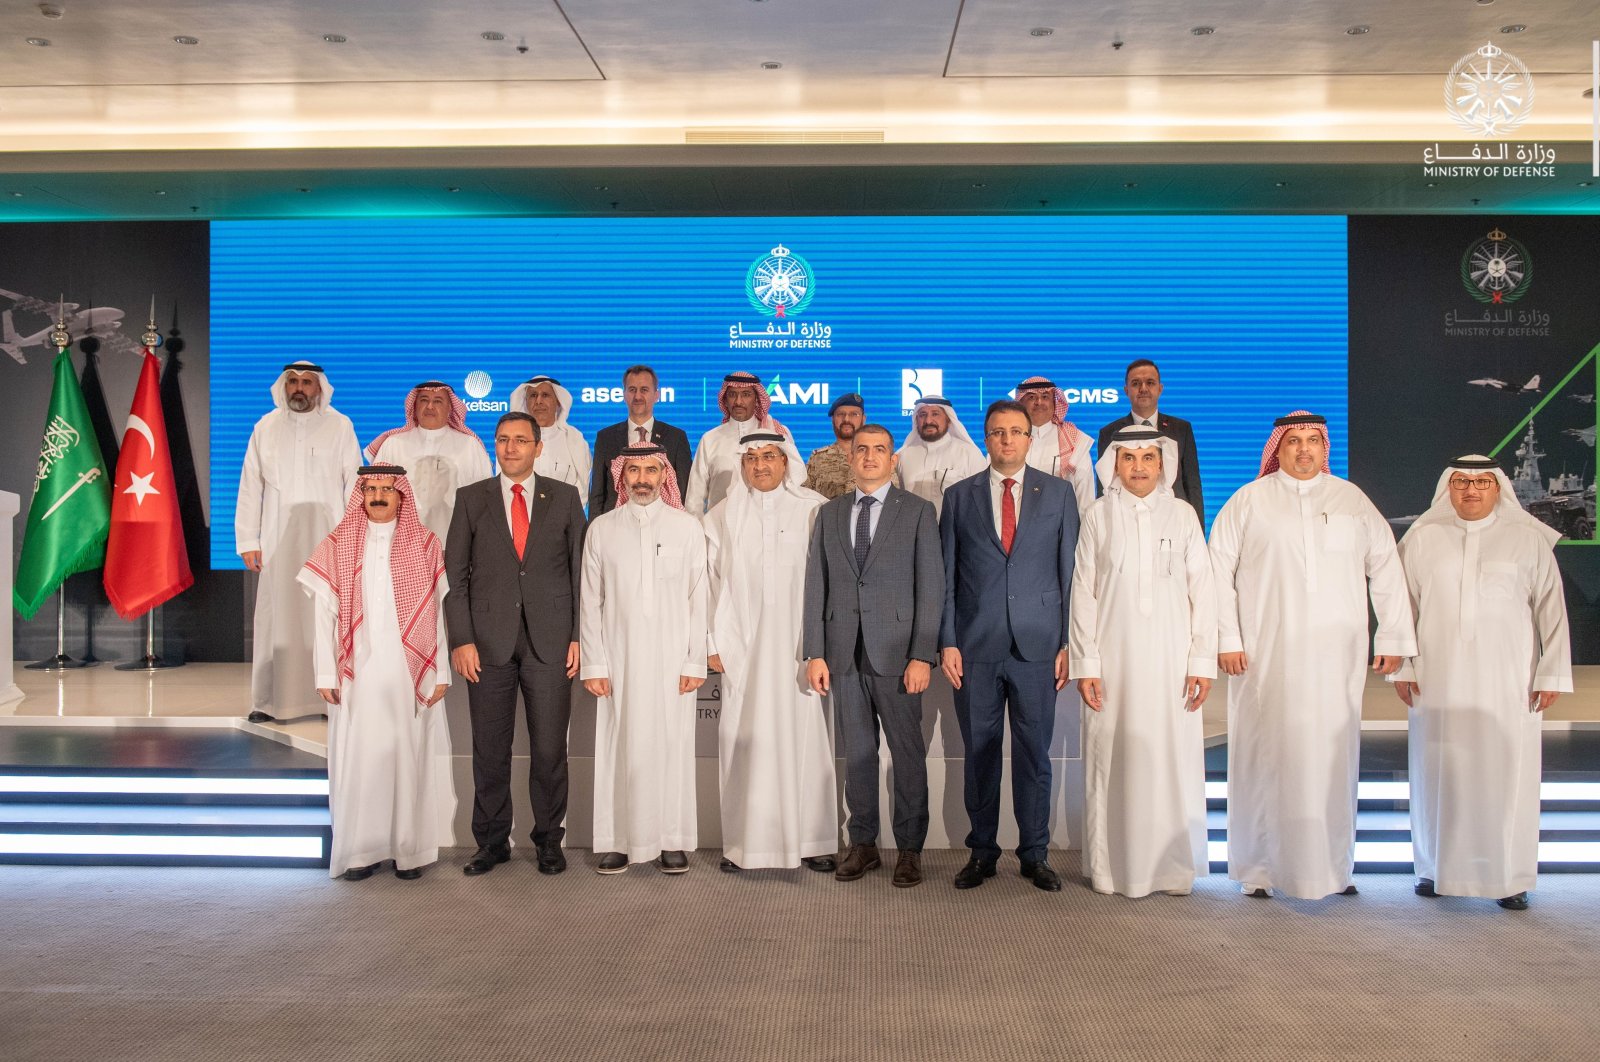 Turkish and Saudi Arabian defense officials and executives pose for a photo after a signing ceremony in Riyadh, Saudi Arabia, July 6, 2023. (Courtesy of SAMI)